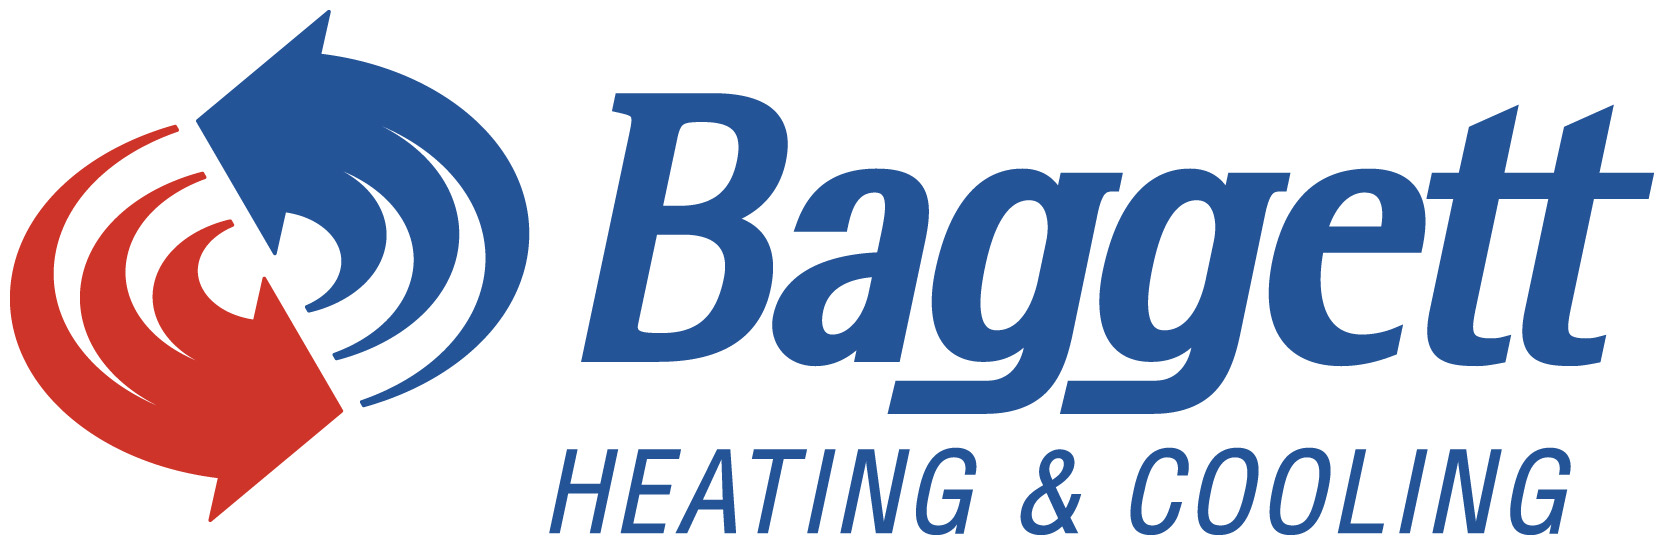 Baggett Heating and Cooling, Clarksville, TN, 2024 Empty Bowls Gold Sponsor